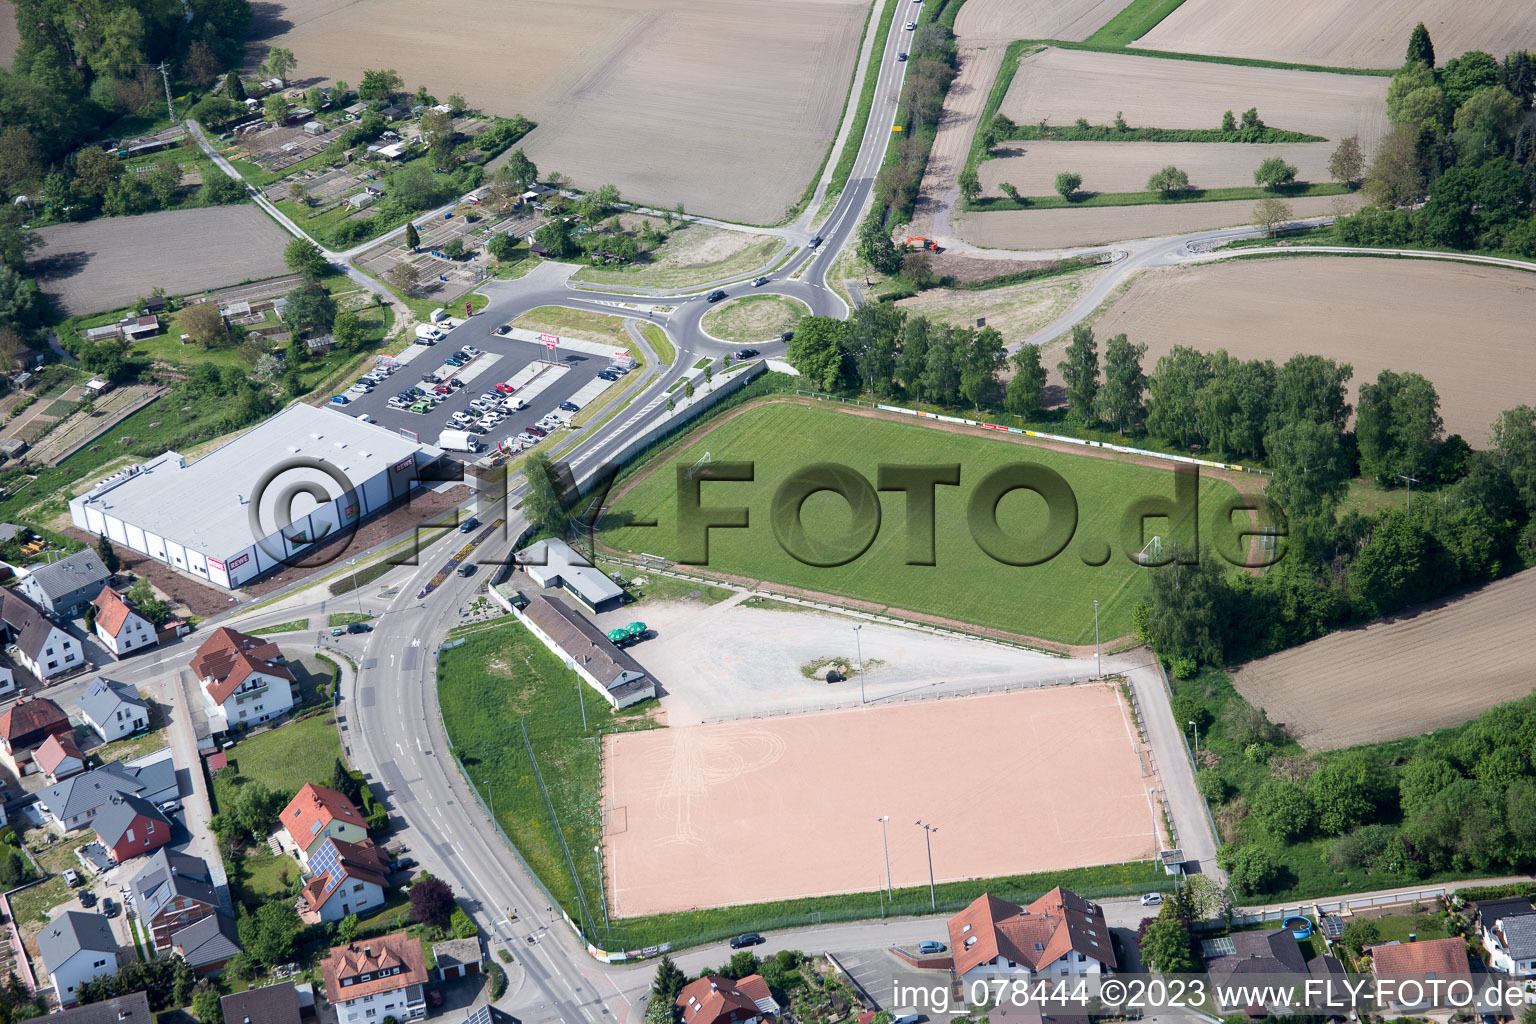 Hagenbach in the state Rhineland-Palatinate, Germany viewn from the air